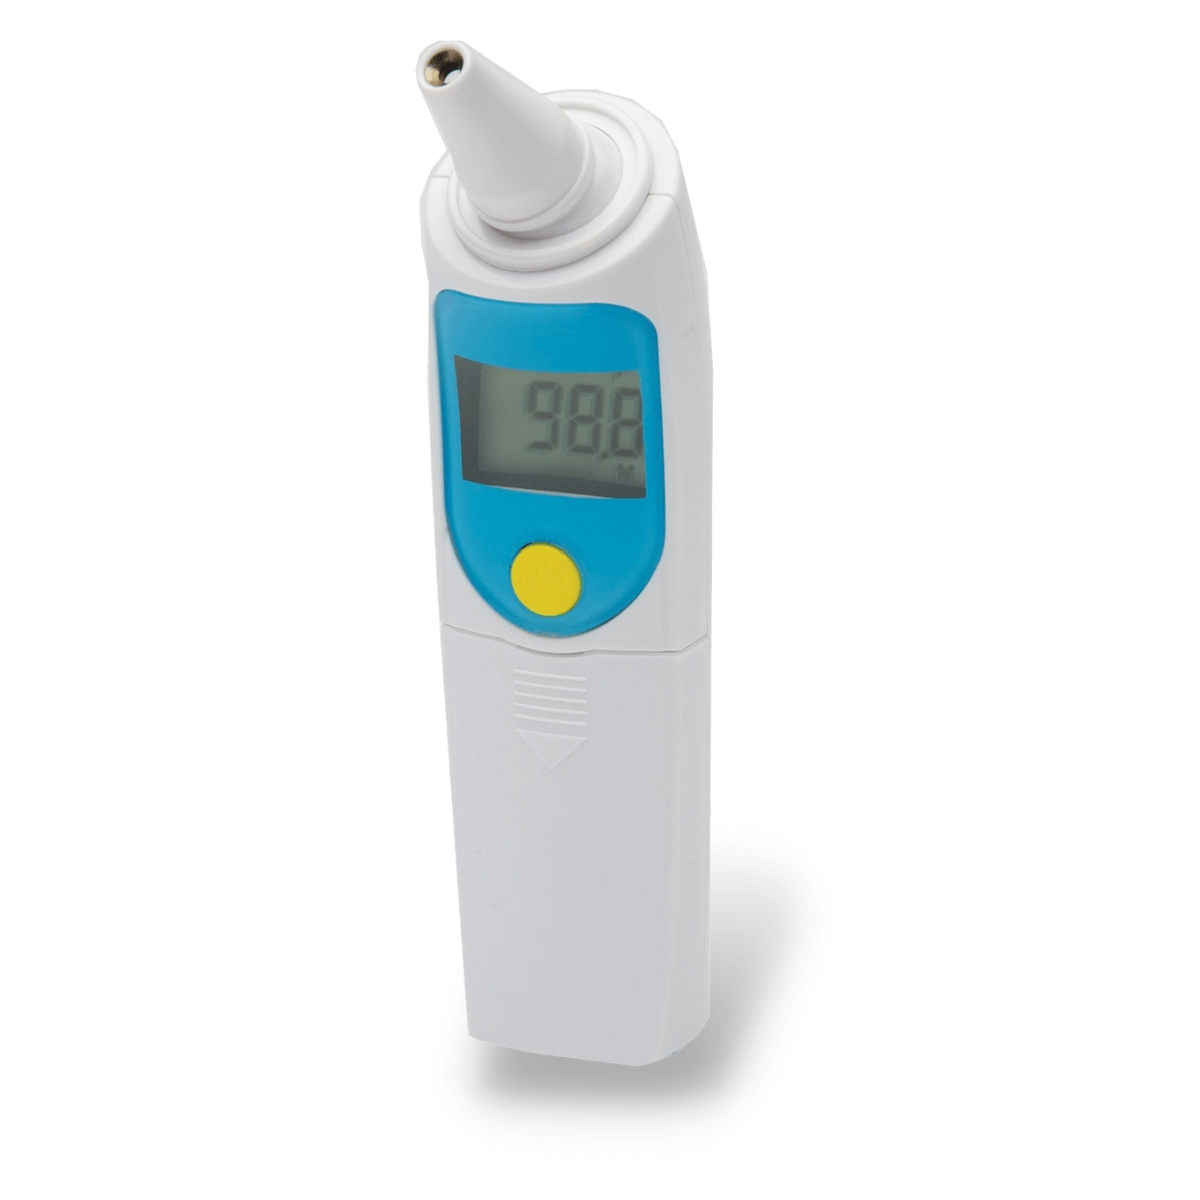 Talking Ear Thermometer FOR SALE - FREE Shipping